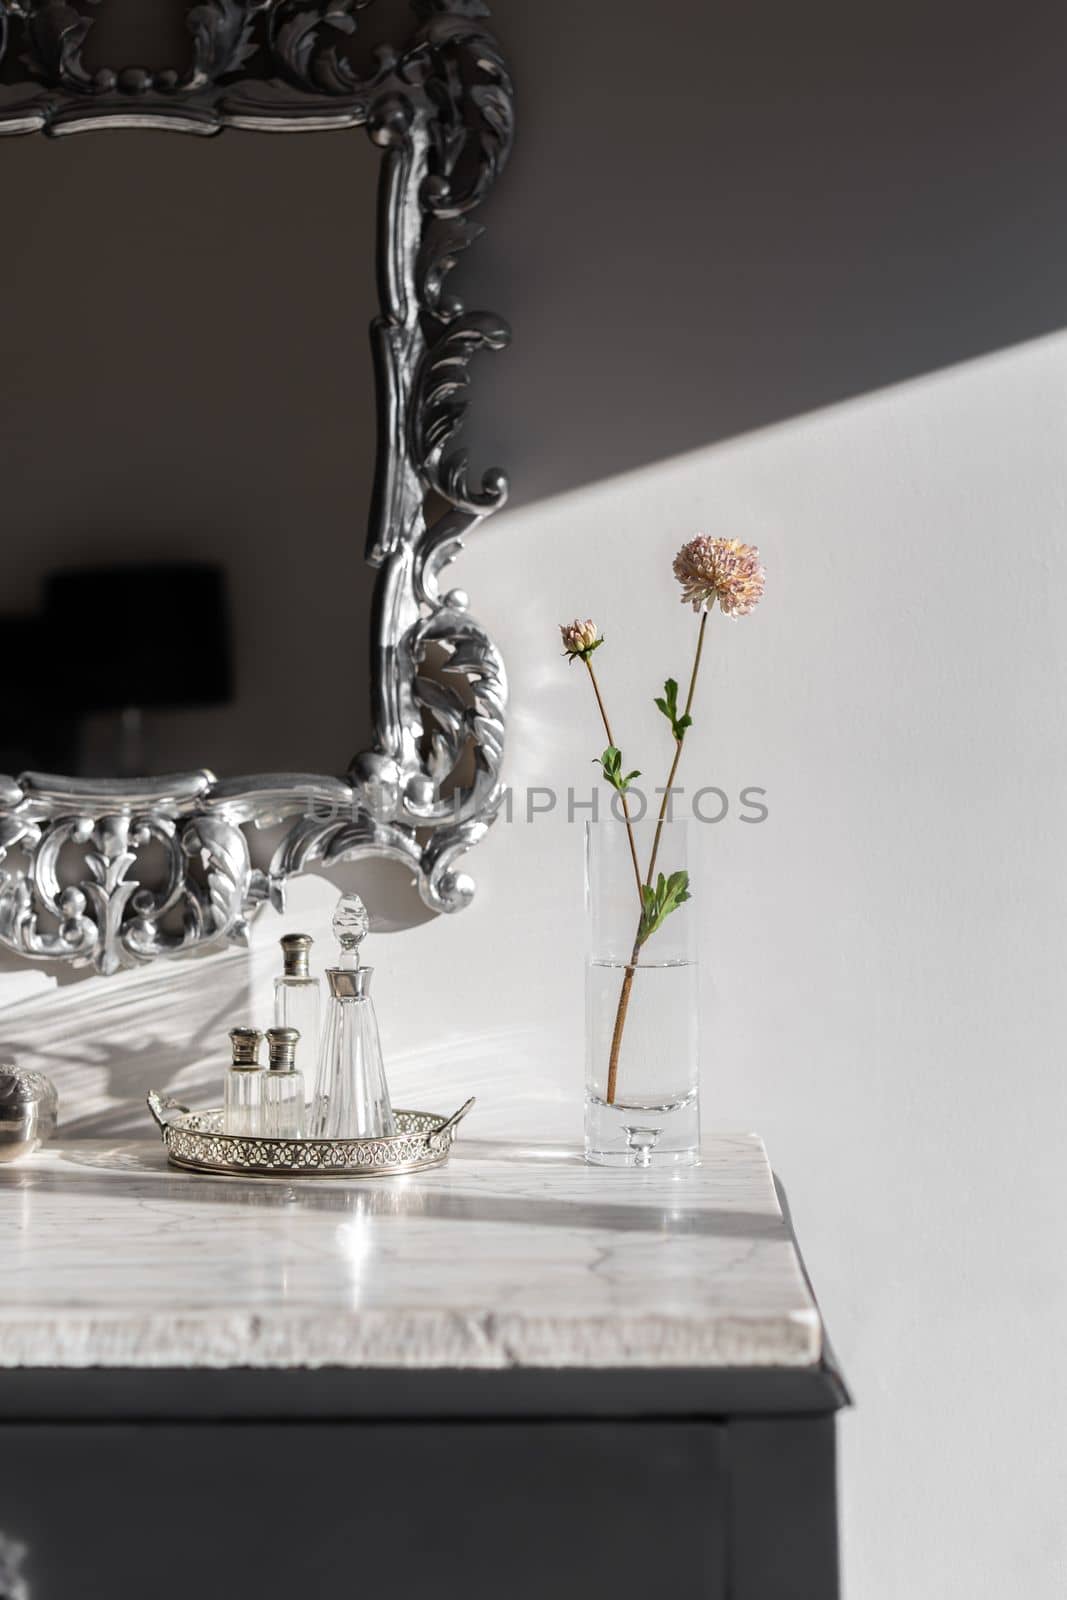 Part of dressing table with vase and flower bright by sunlight on white marble top. Mirror in silver frame with beautiful figured monograms. On table are empty bottles of fragrant perfume